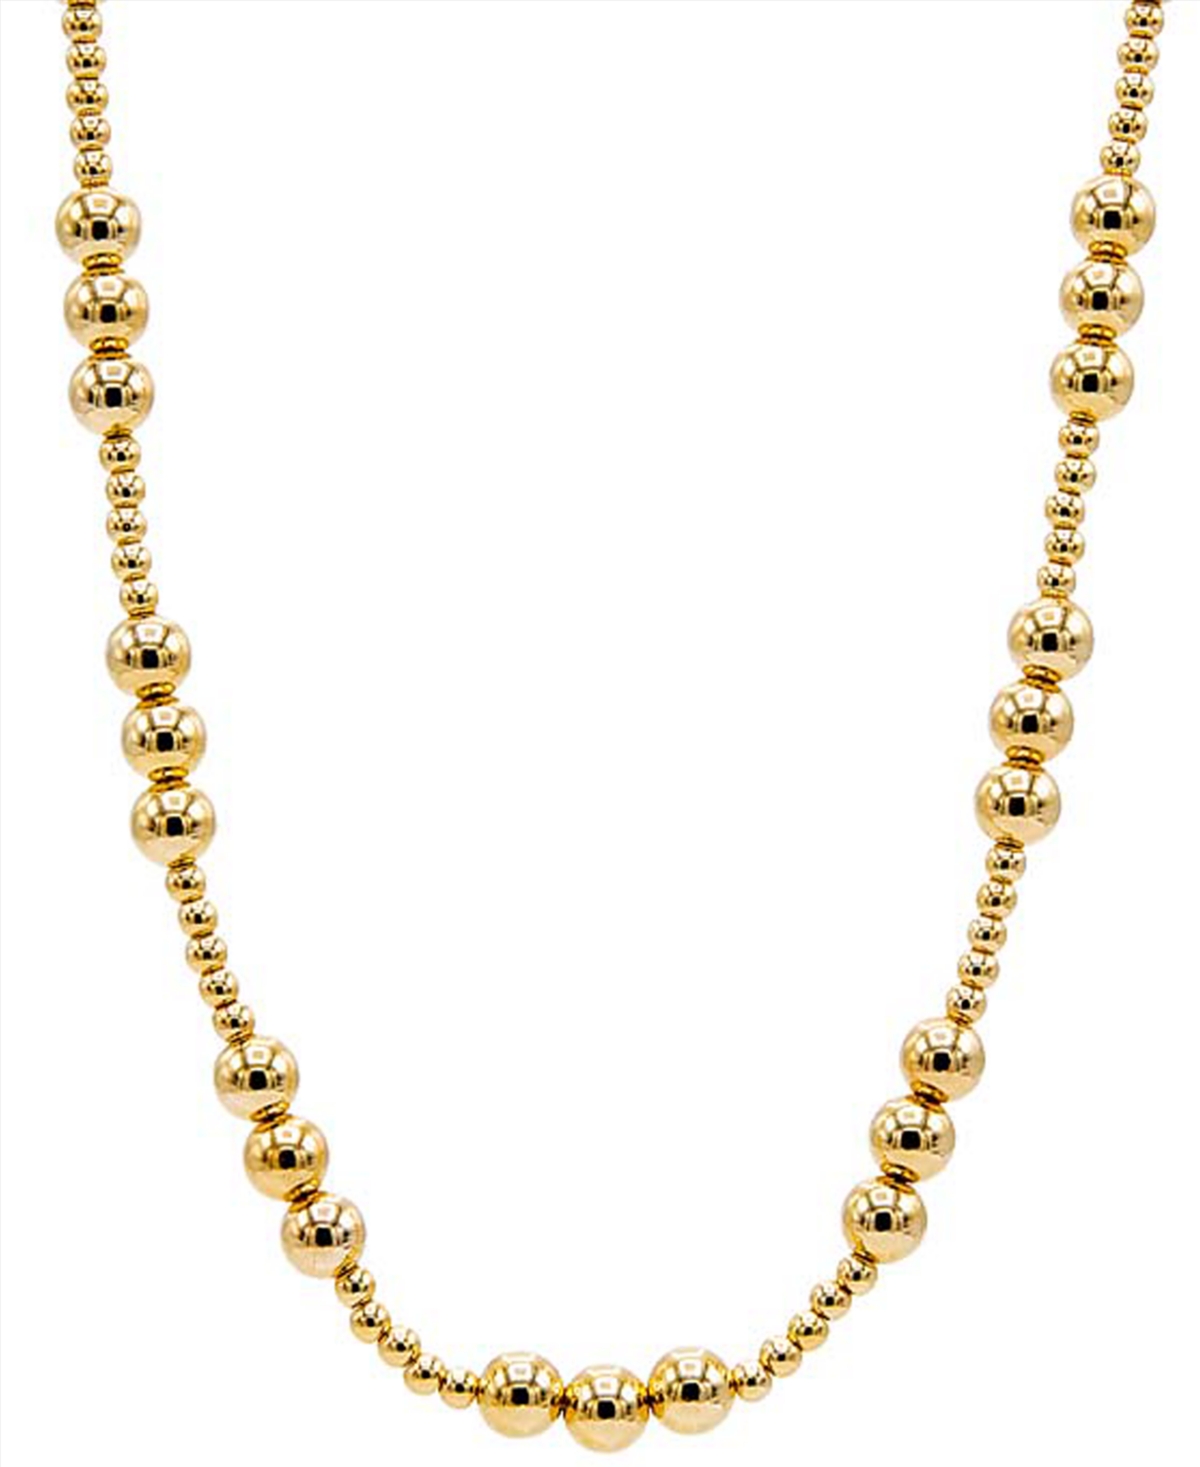 By Adina Eden 14k Gold-plated Beaded Collar Necklace, 16" + 2" Extender